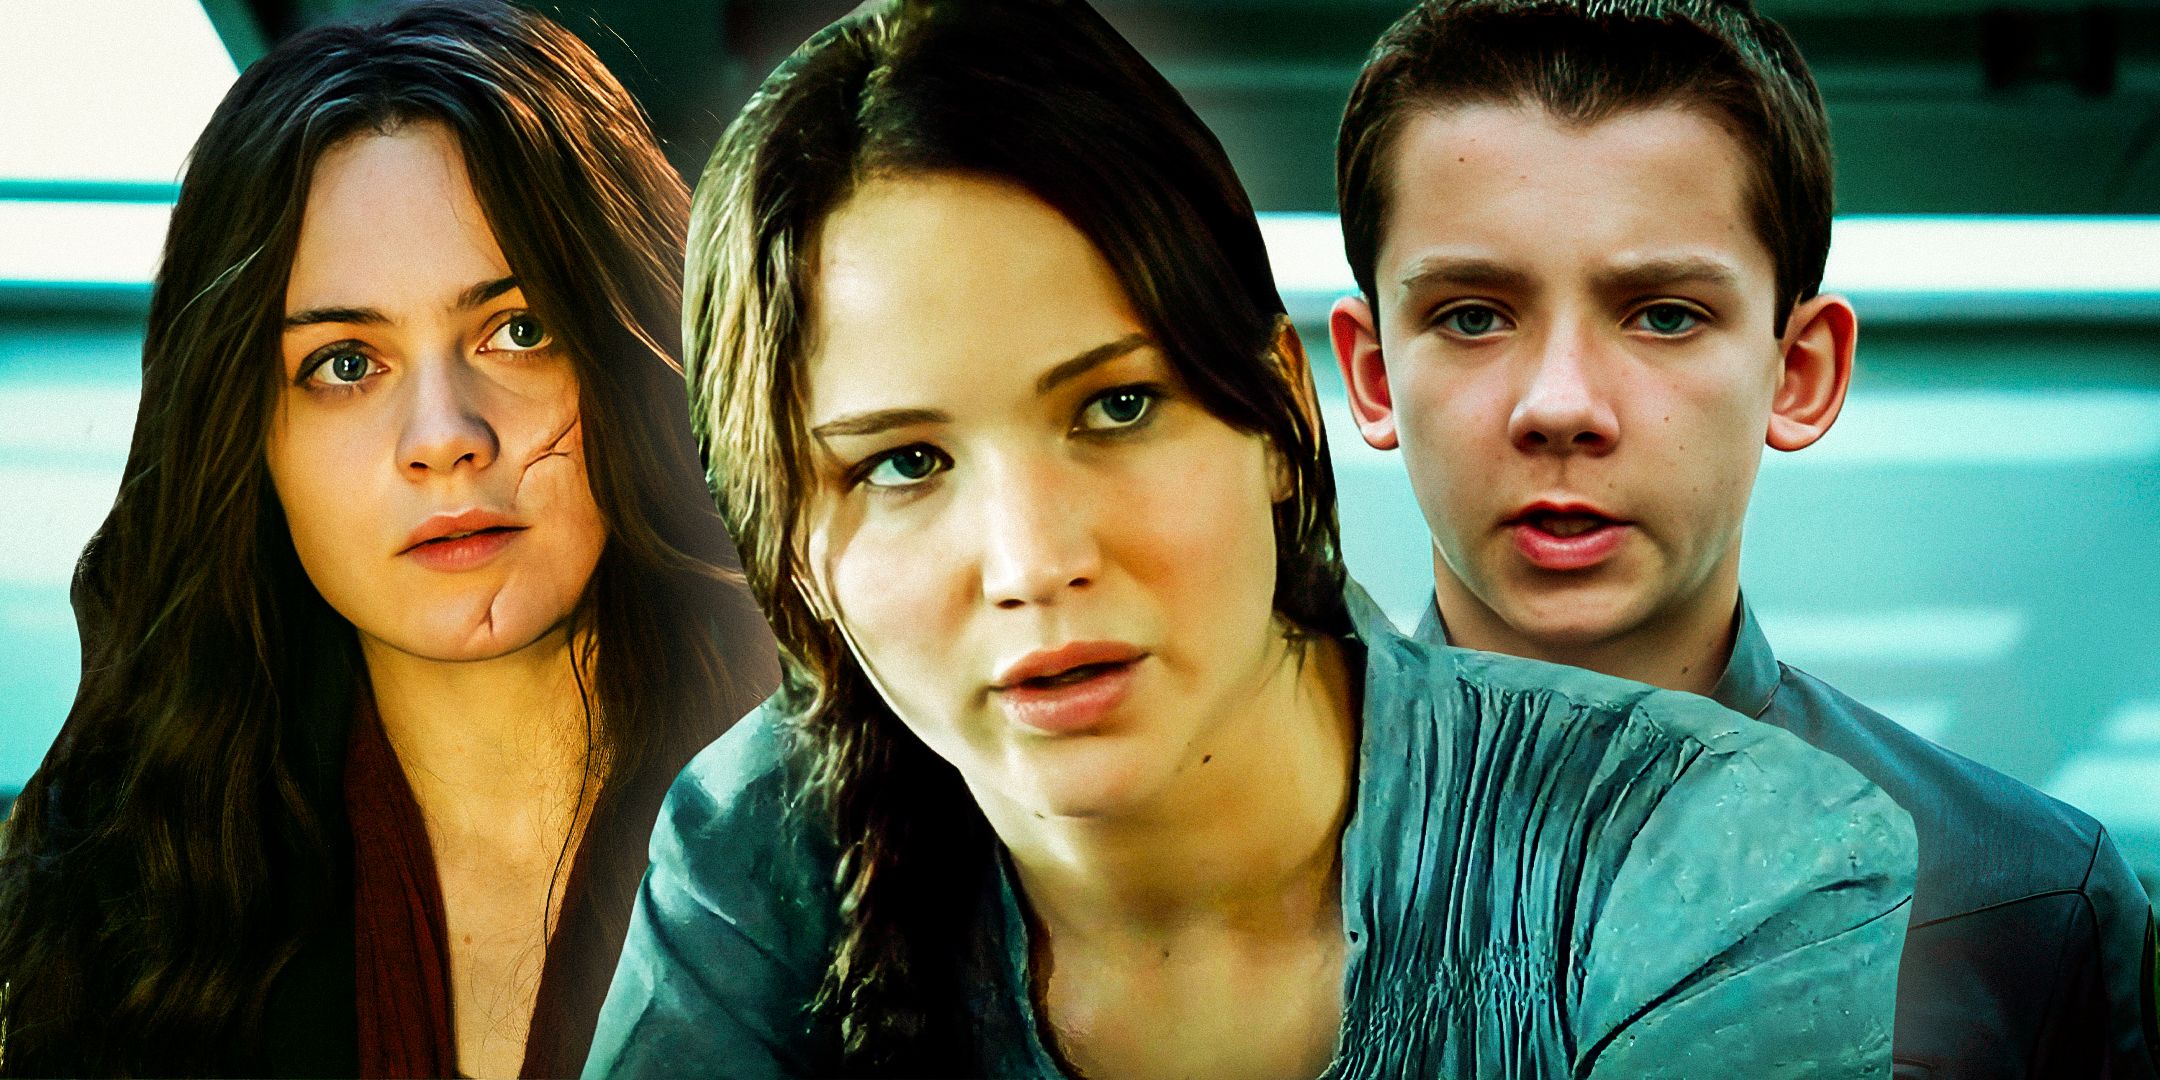 Jennifer-Lawrence-as-Katniss-Everdeen-from-The-Hunger-Games-Hera-Hilmar-as-Hester-Shaw-from-Mortal-Engines-and-Asa-Butterfield-as-Ender-Wiggin-from-Enders-Game